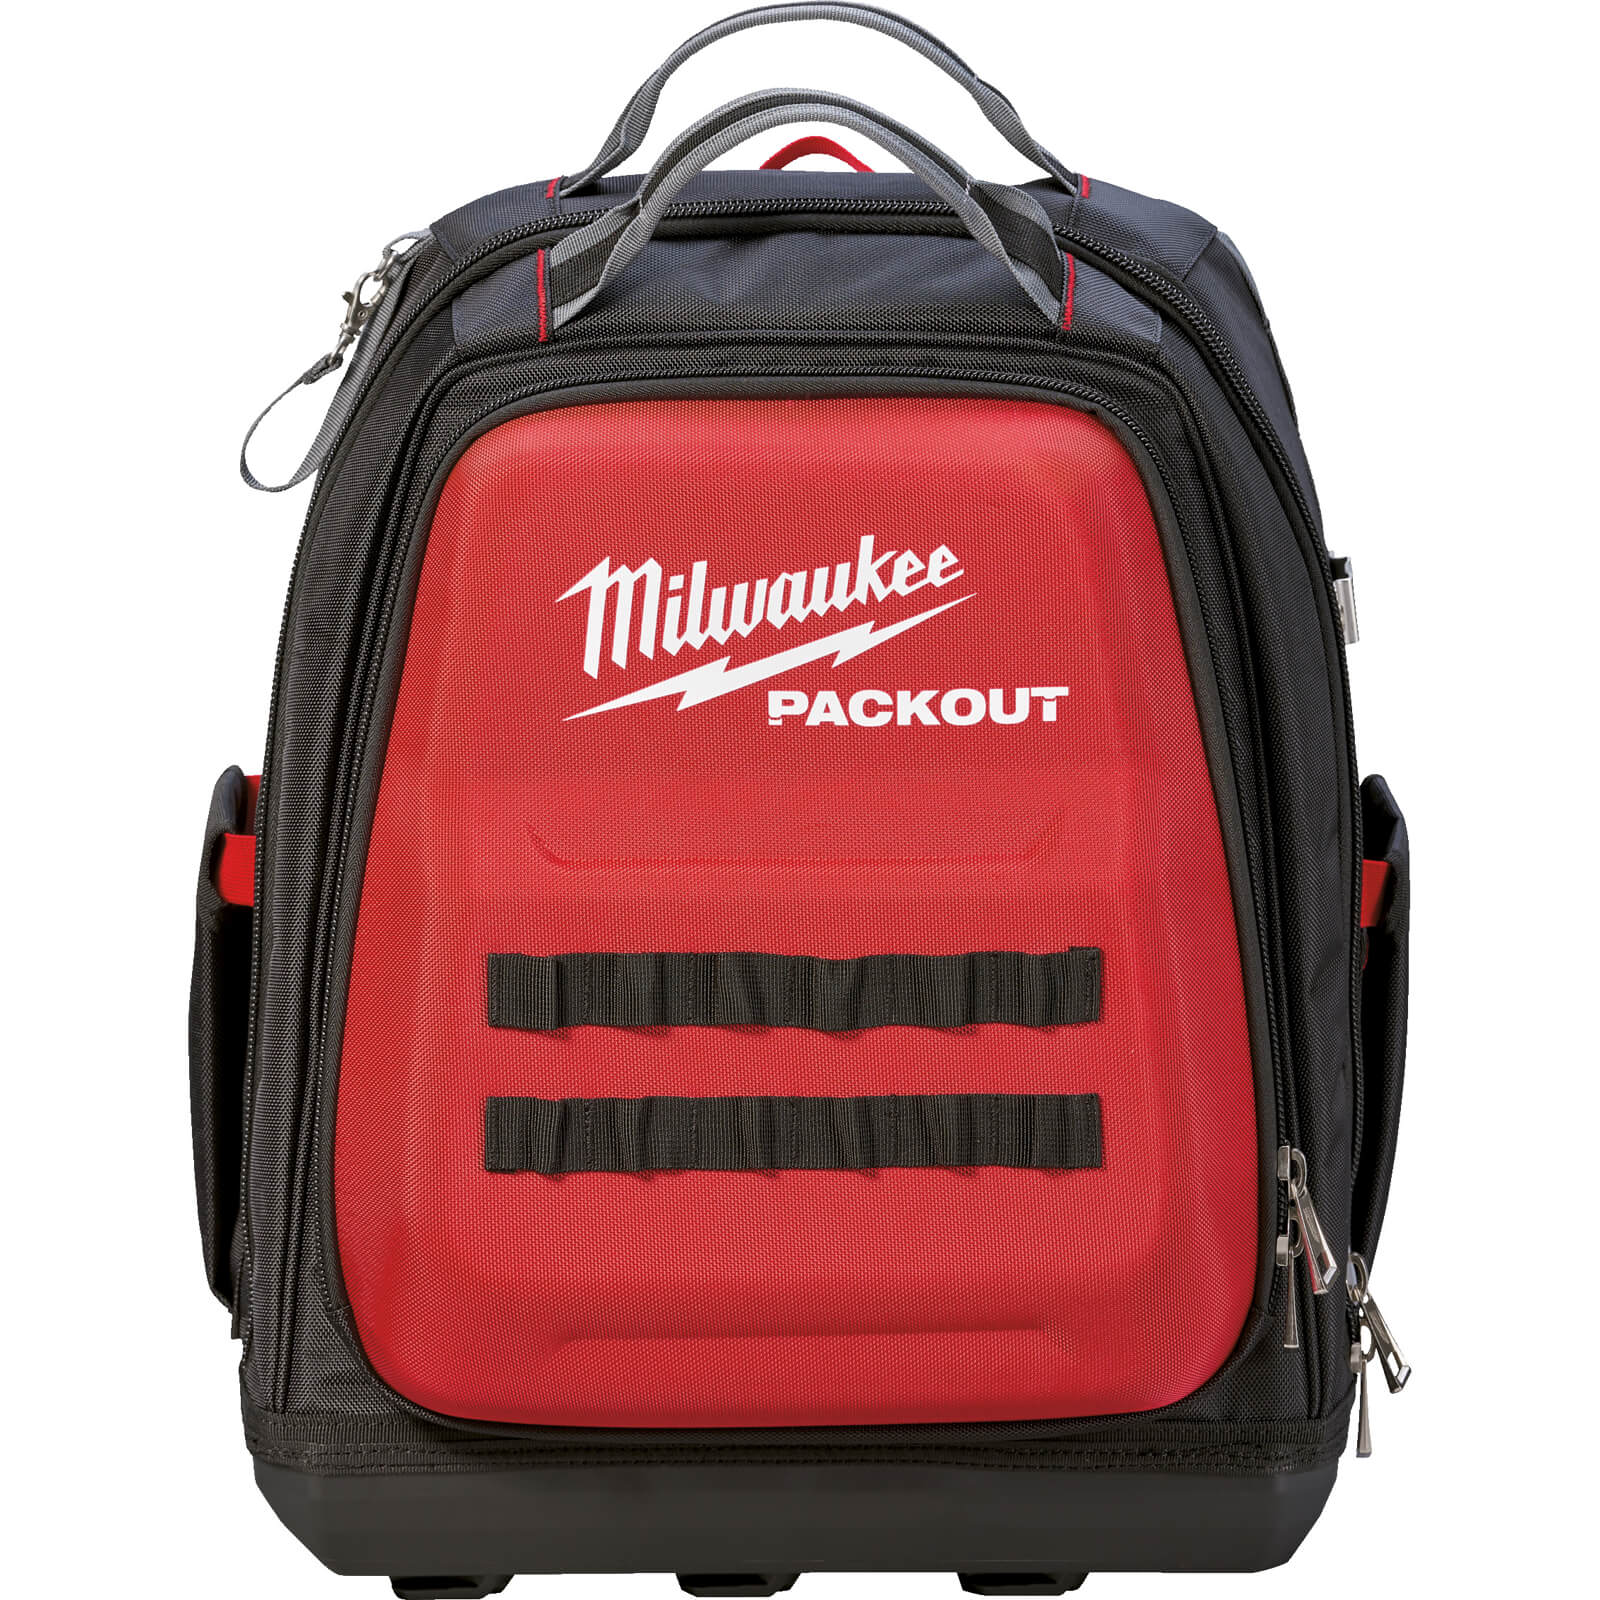 Image of Milwaukee Packout Backpack